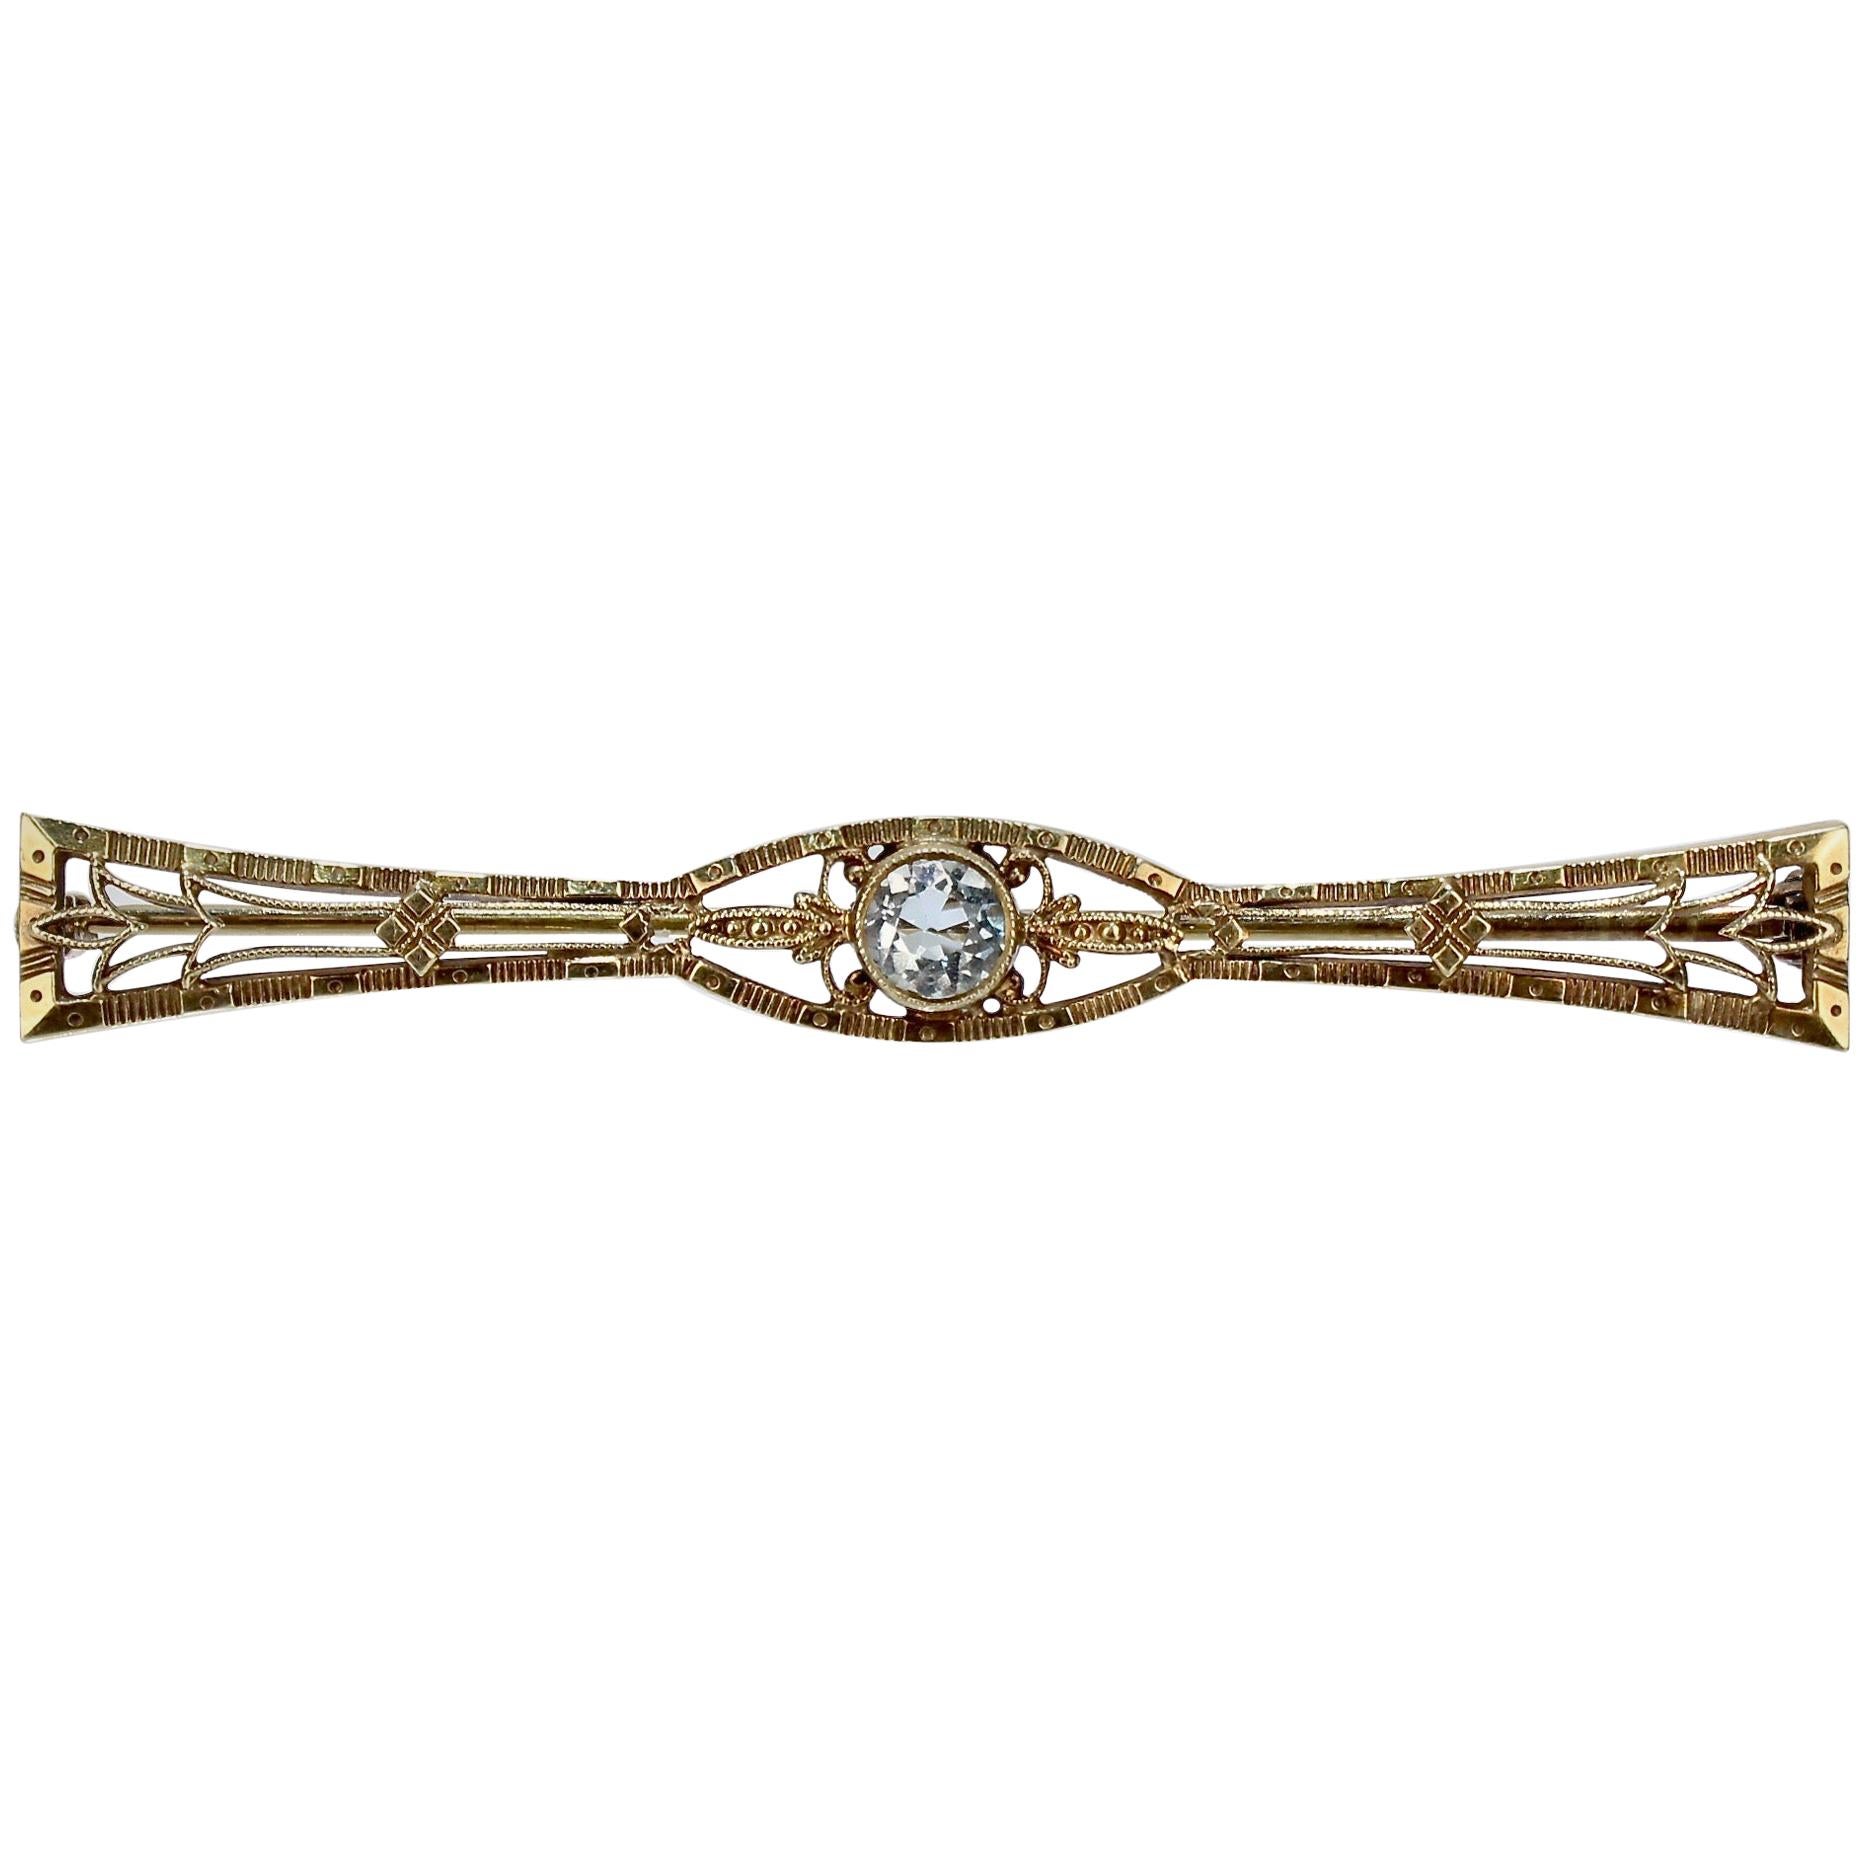 Edwardian 14 Karat Gold and Aquamarine Filigree Bow Tie Brooch or Pin For Sale